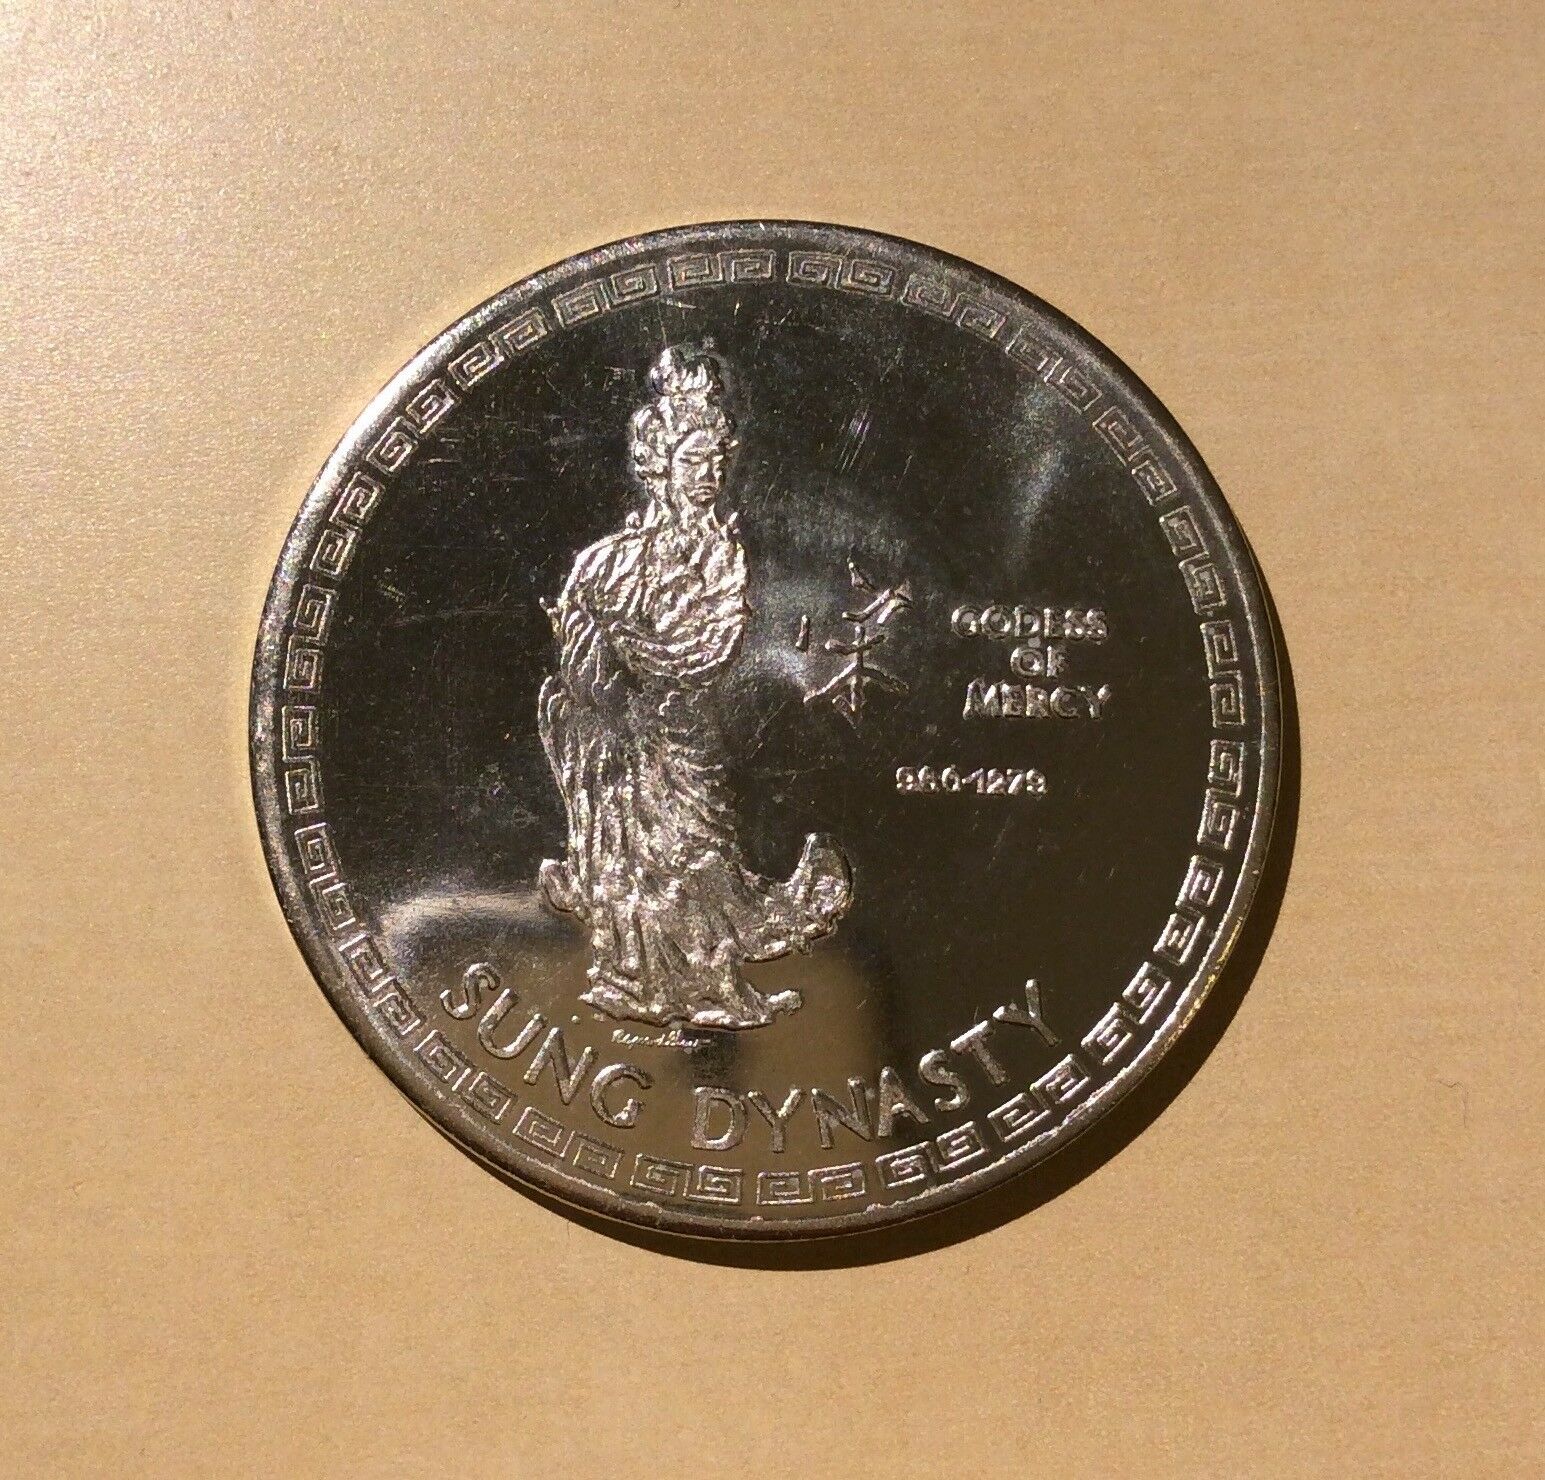 Vancouver Bc Chinatown Sung Dynasty 1978 Chariot And Goddess Of Mercy Dollar